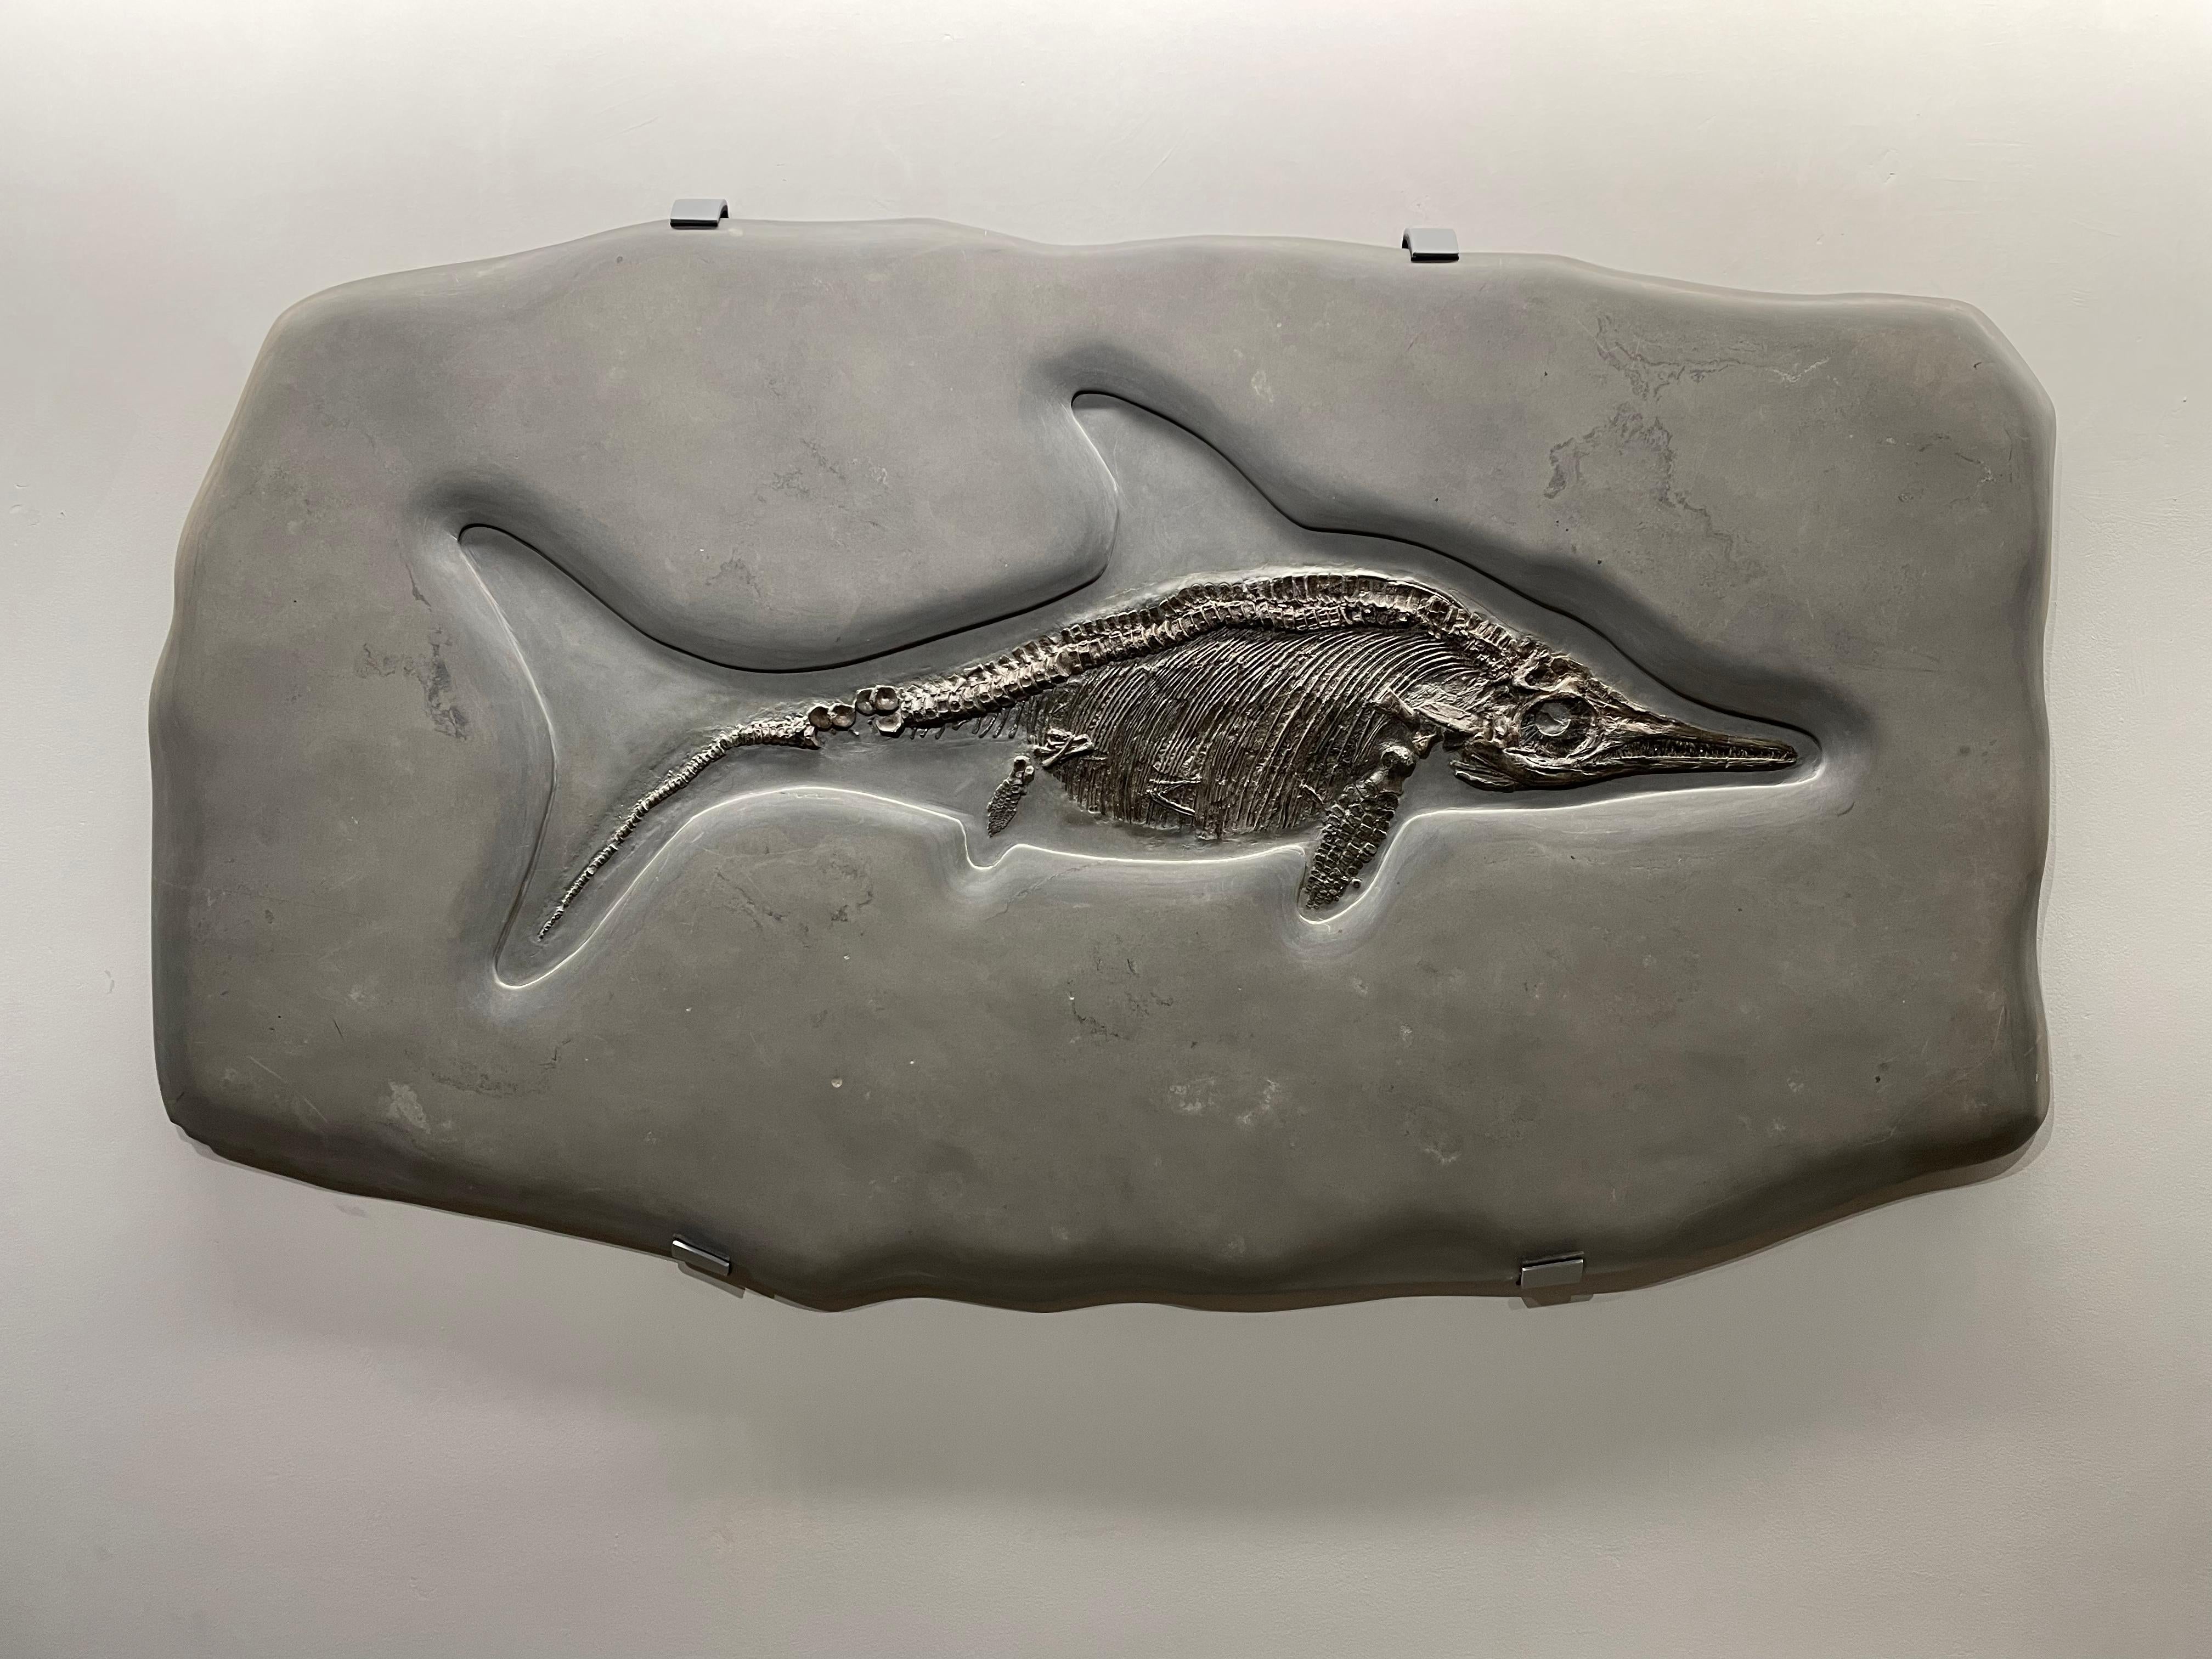 Rare and complete fossilised skeleton of an Ichthyosaur skeleton in grey matrix

Ichthyosaurus
Late Jurassic (165-145 million years ago)
Measures: 72 x 125 x 4 cm
Jurassic Coast, Dorset, UK

A superbly preserved marine reptile, appearing on a